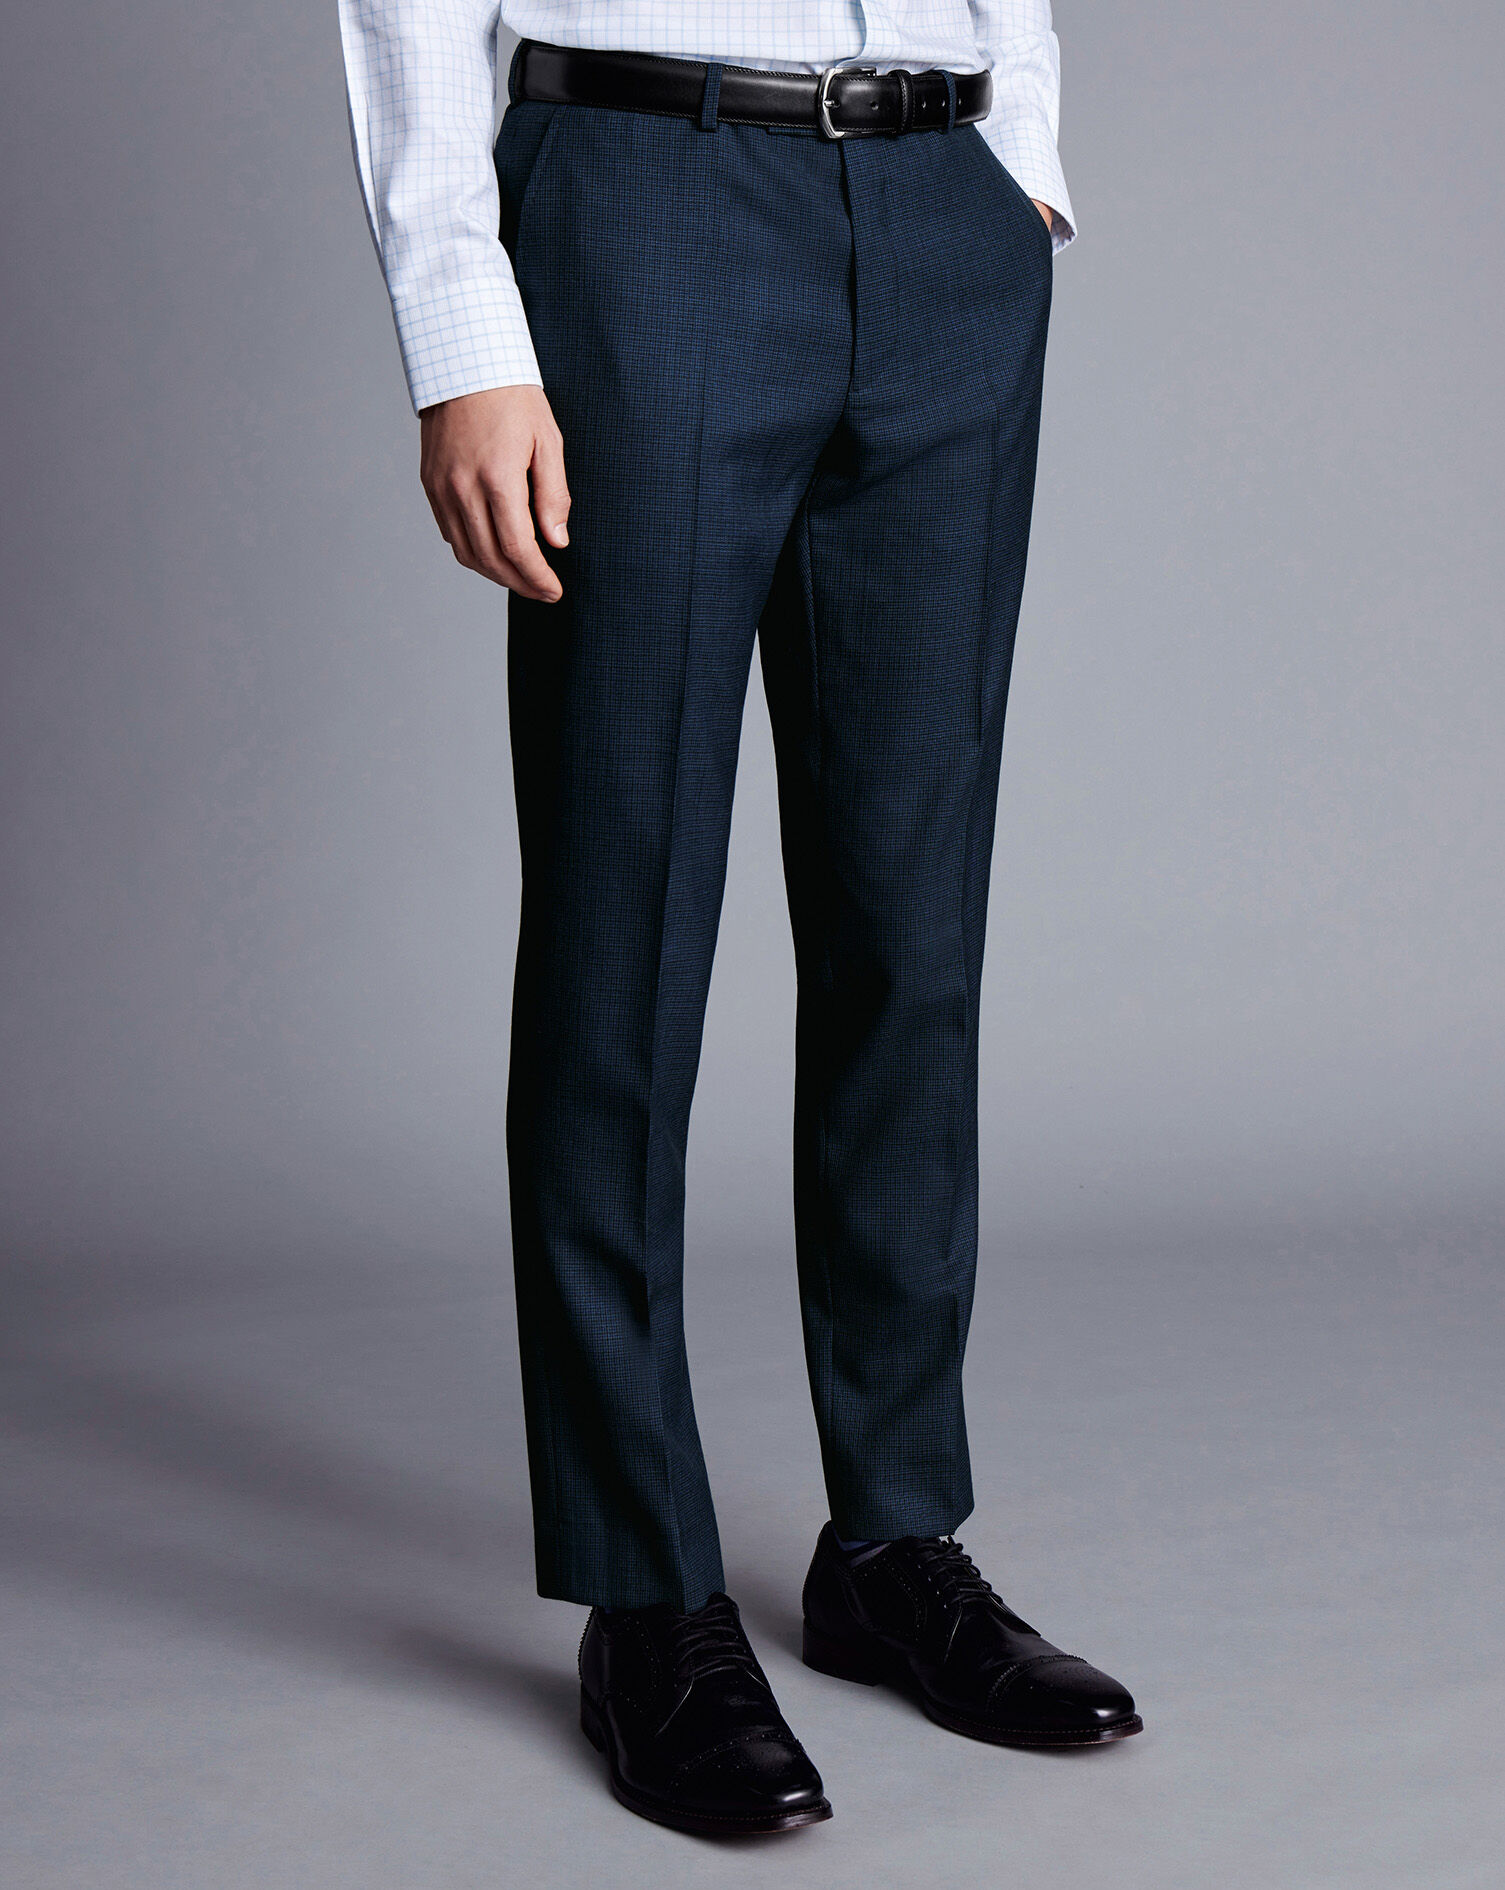 Aggregate 67+ mens navy blue trousers uk - in.cdgdbentre